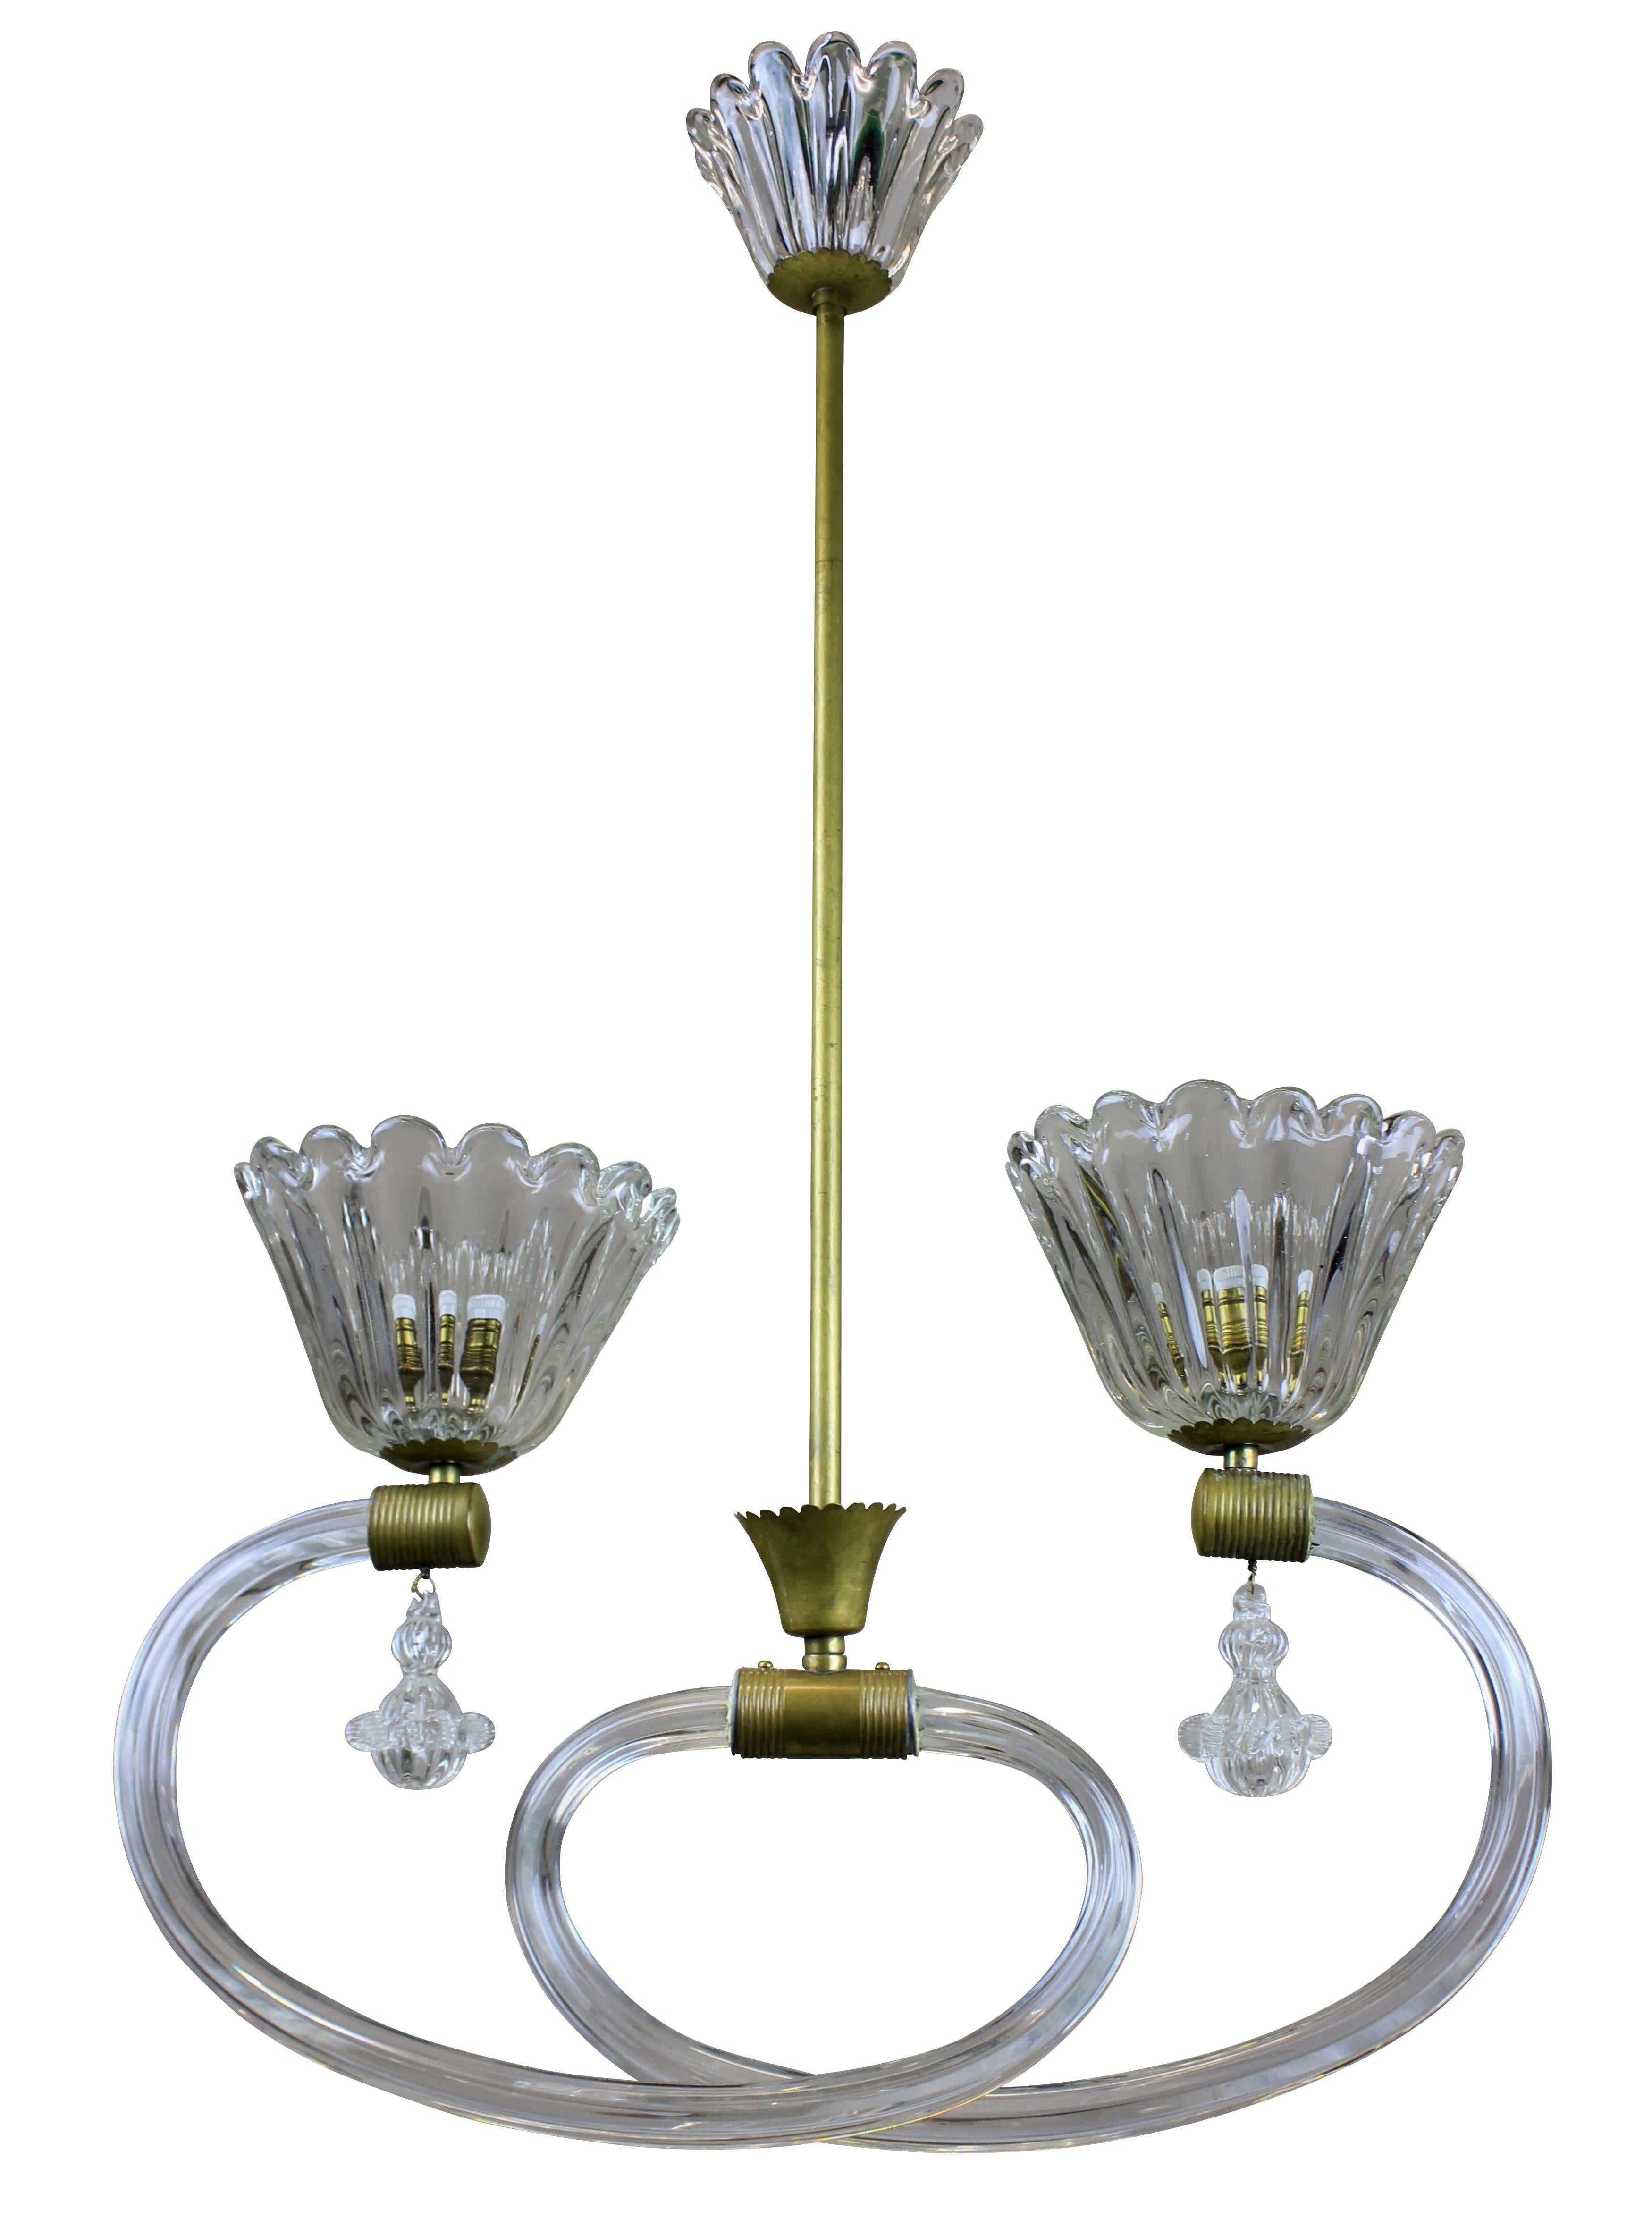 An Italian pendant light by Barovier in brass and hand blown glass.